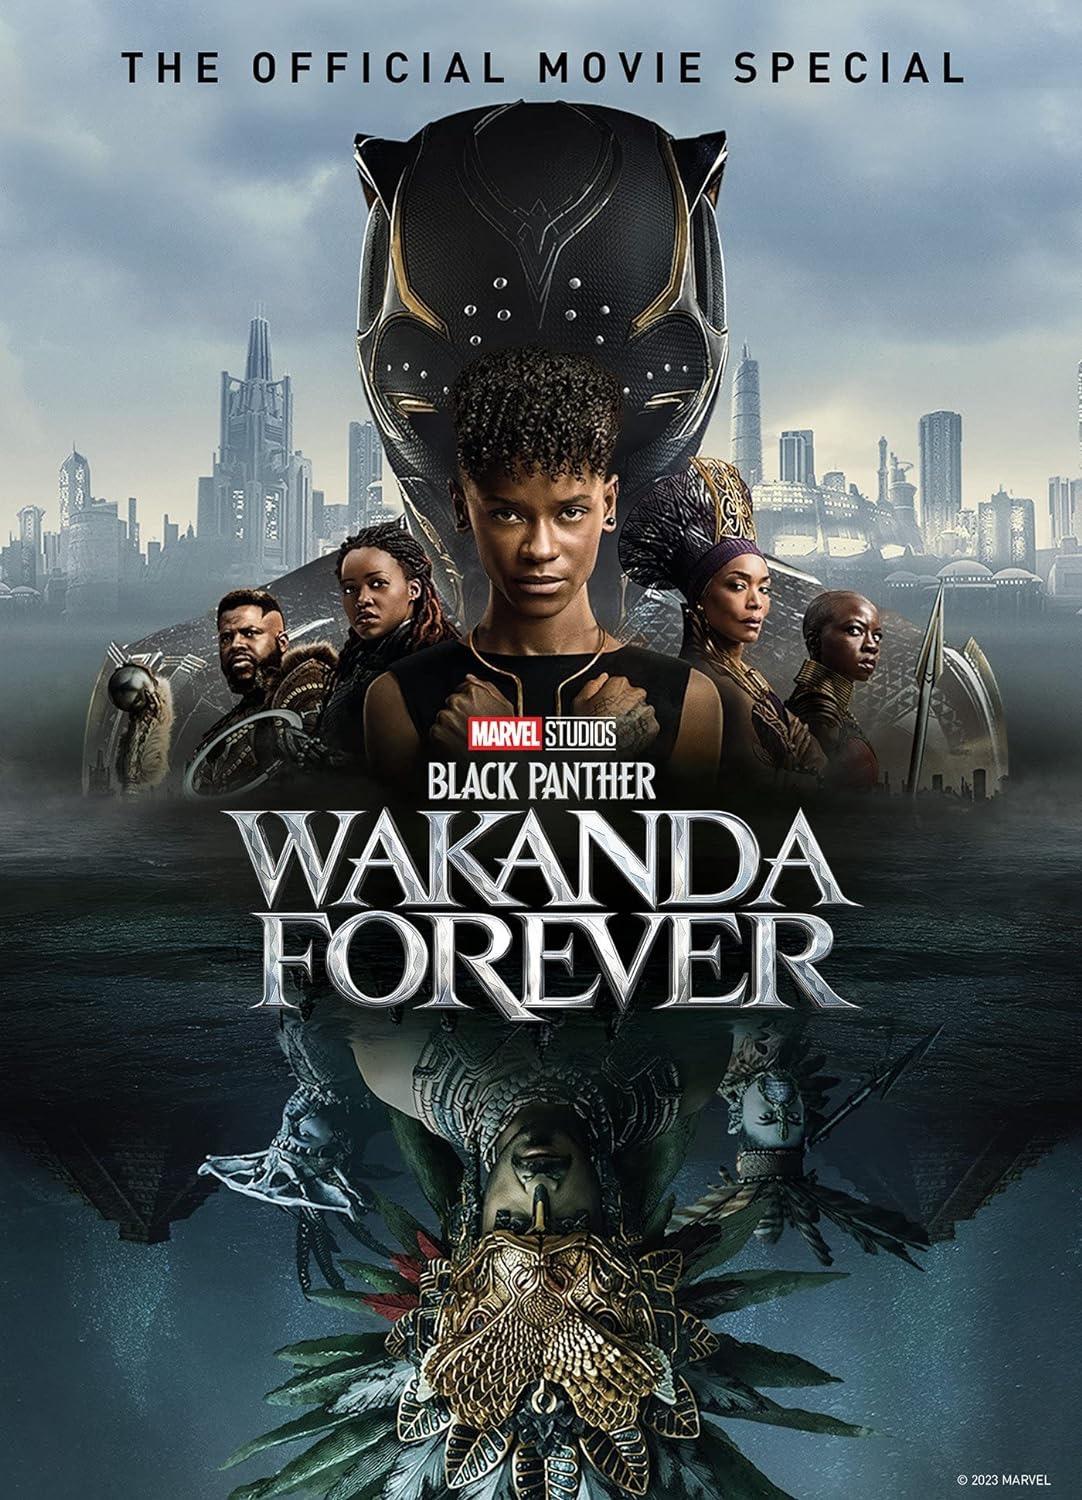 Marvel Studios to Release Black Panther: Wakanda Forever Movie Special